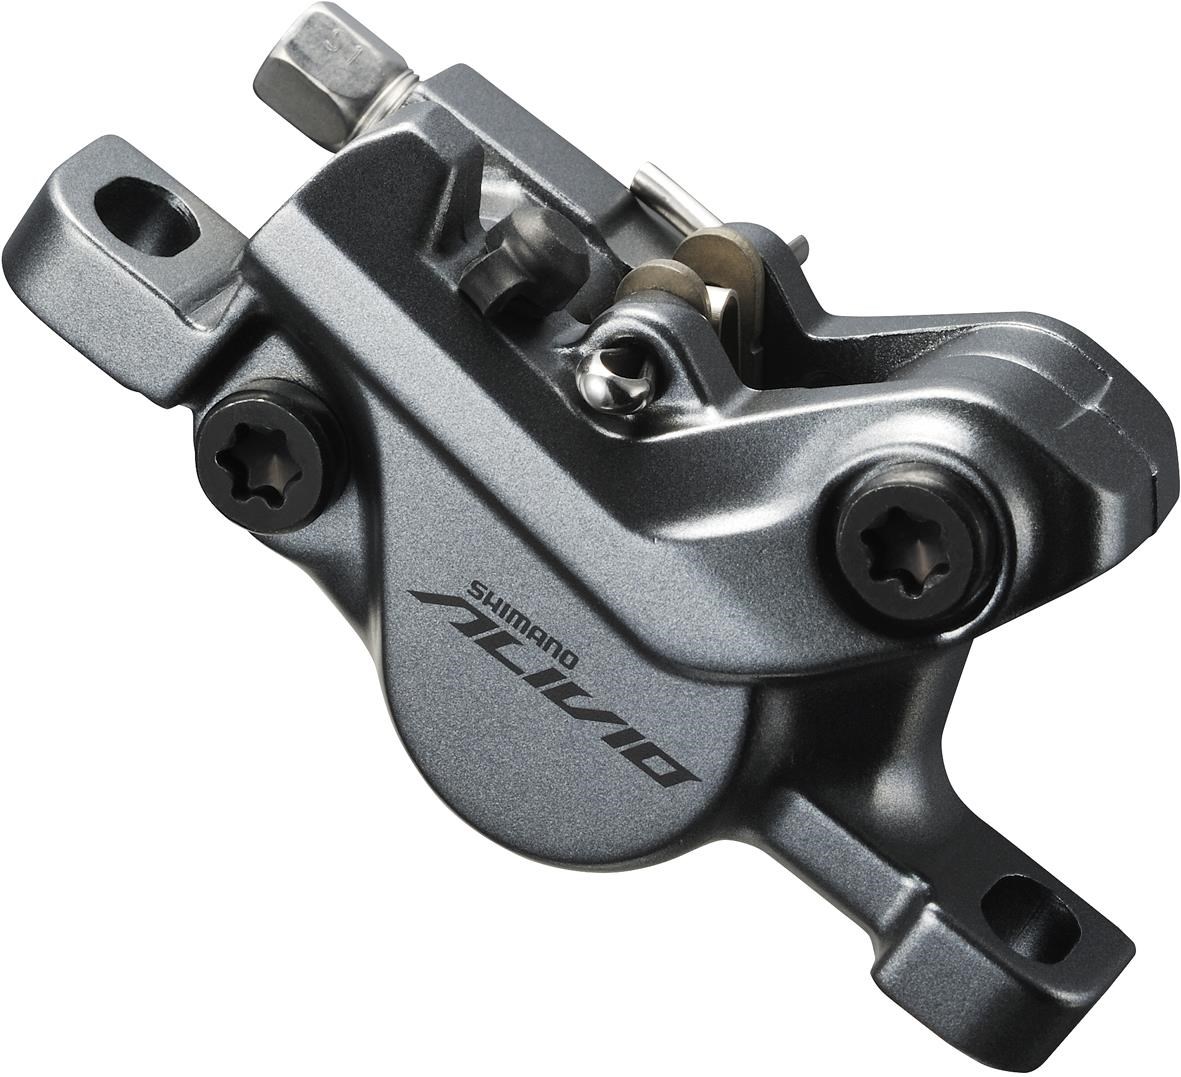 Shimano BR-M4050 Alivio Calliper Without Rotor Or Adapters - Post Mount - Front Or Rear